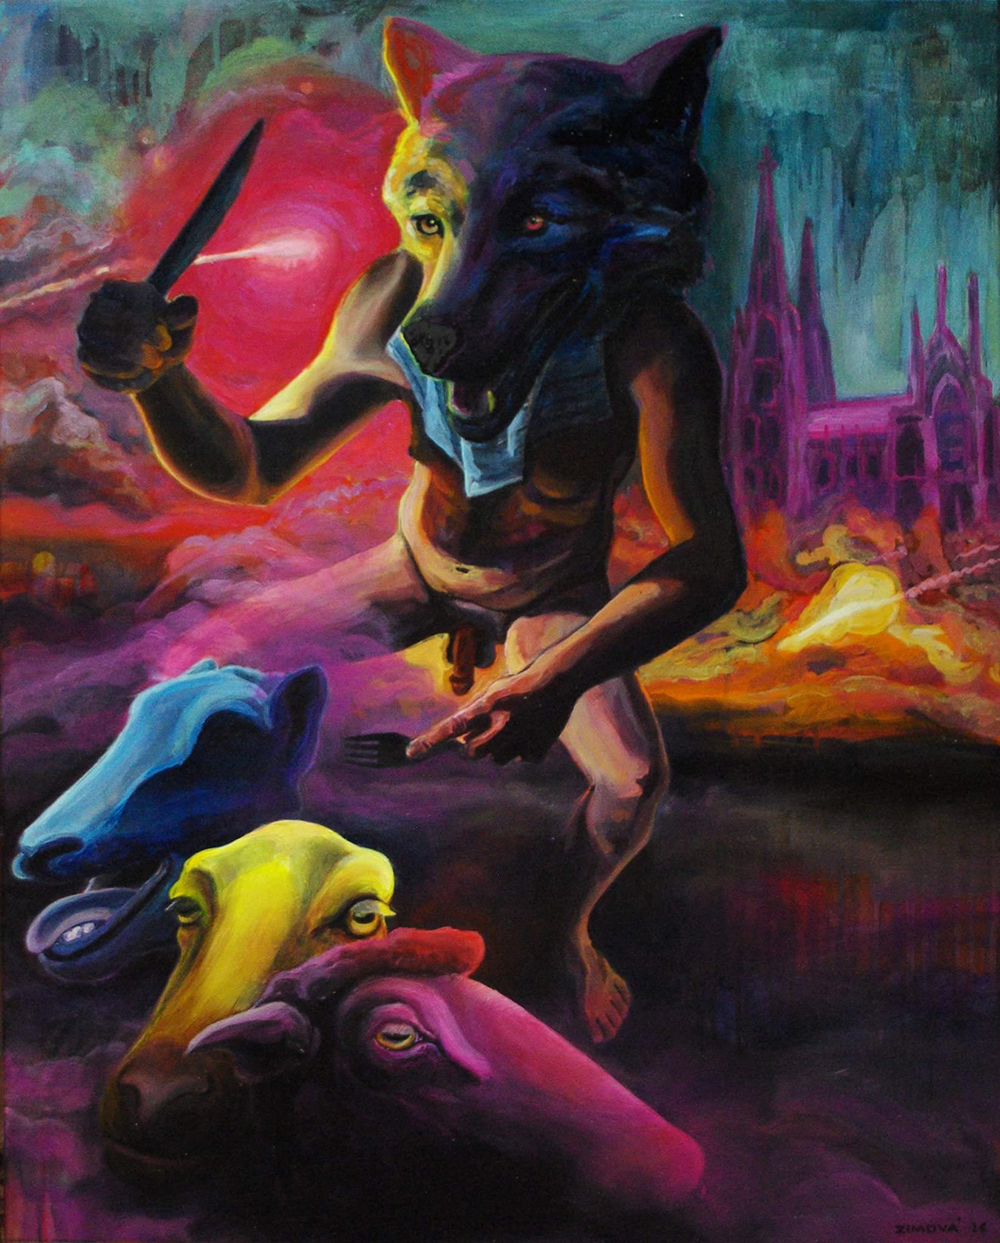 Wolves in sheep clothes: Without senses, 70 x 90 cm, oil on canvas, 2016